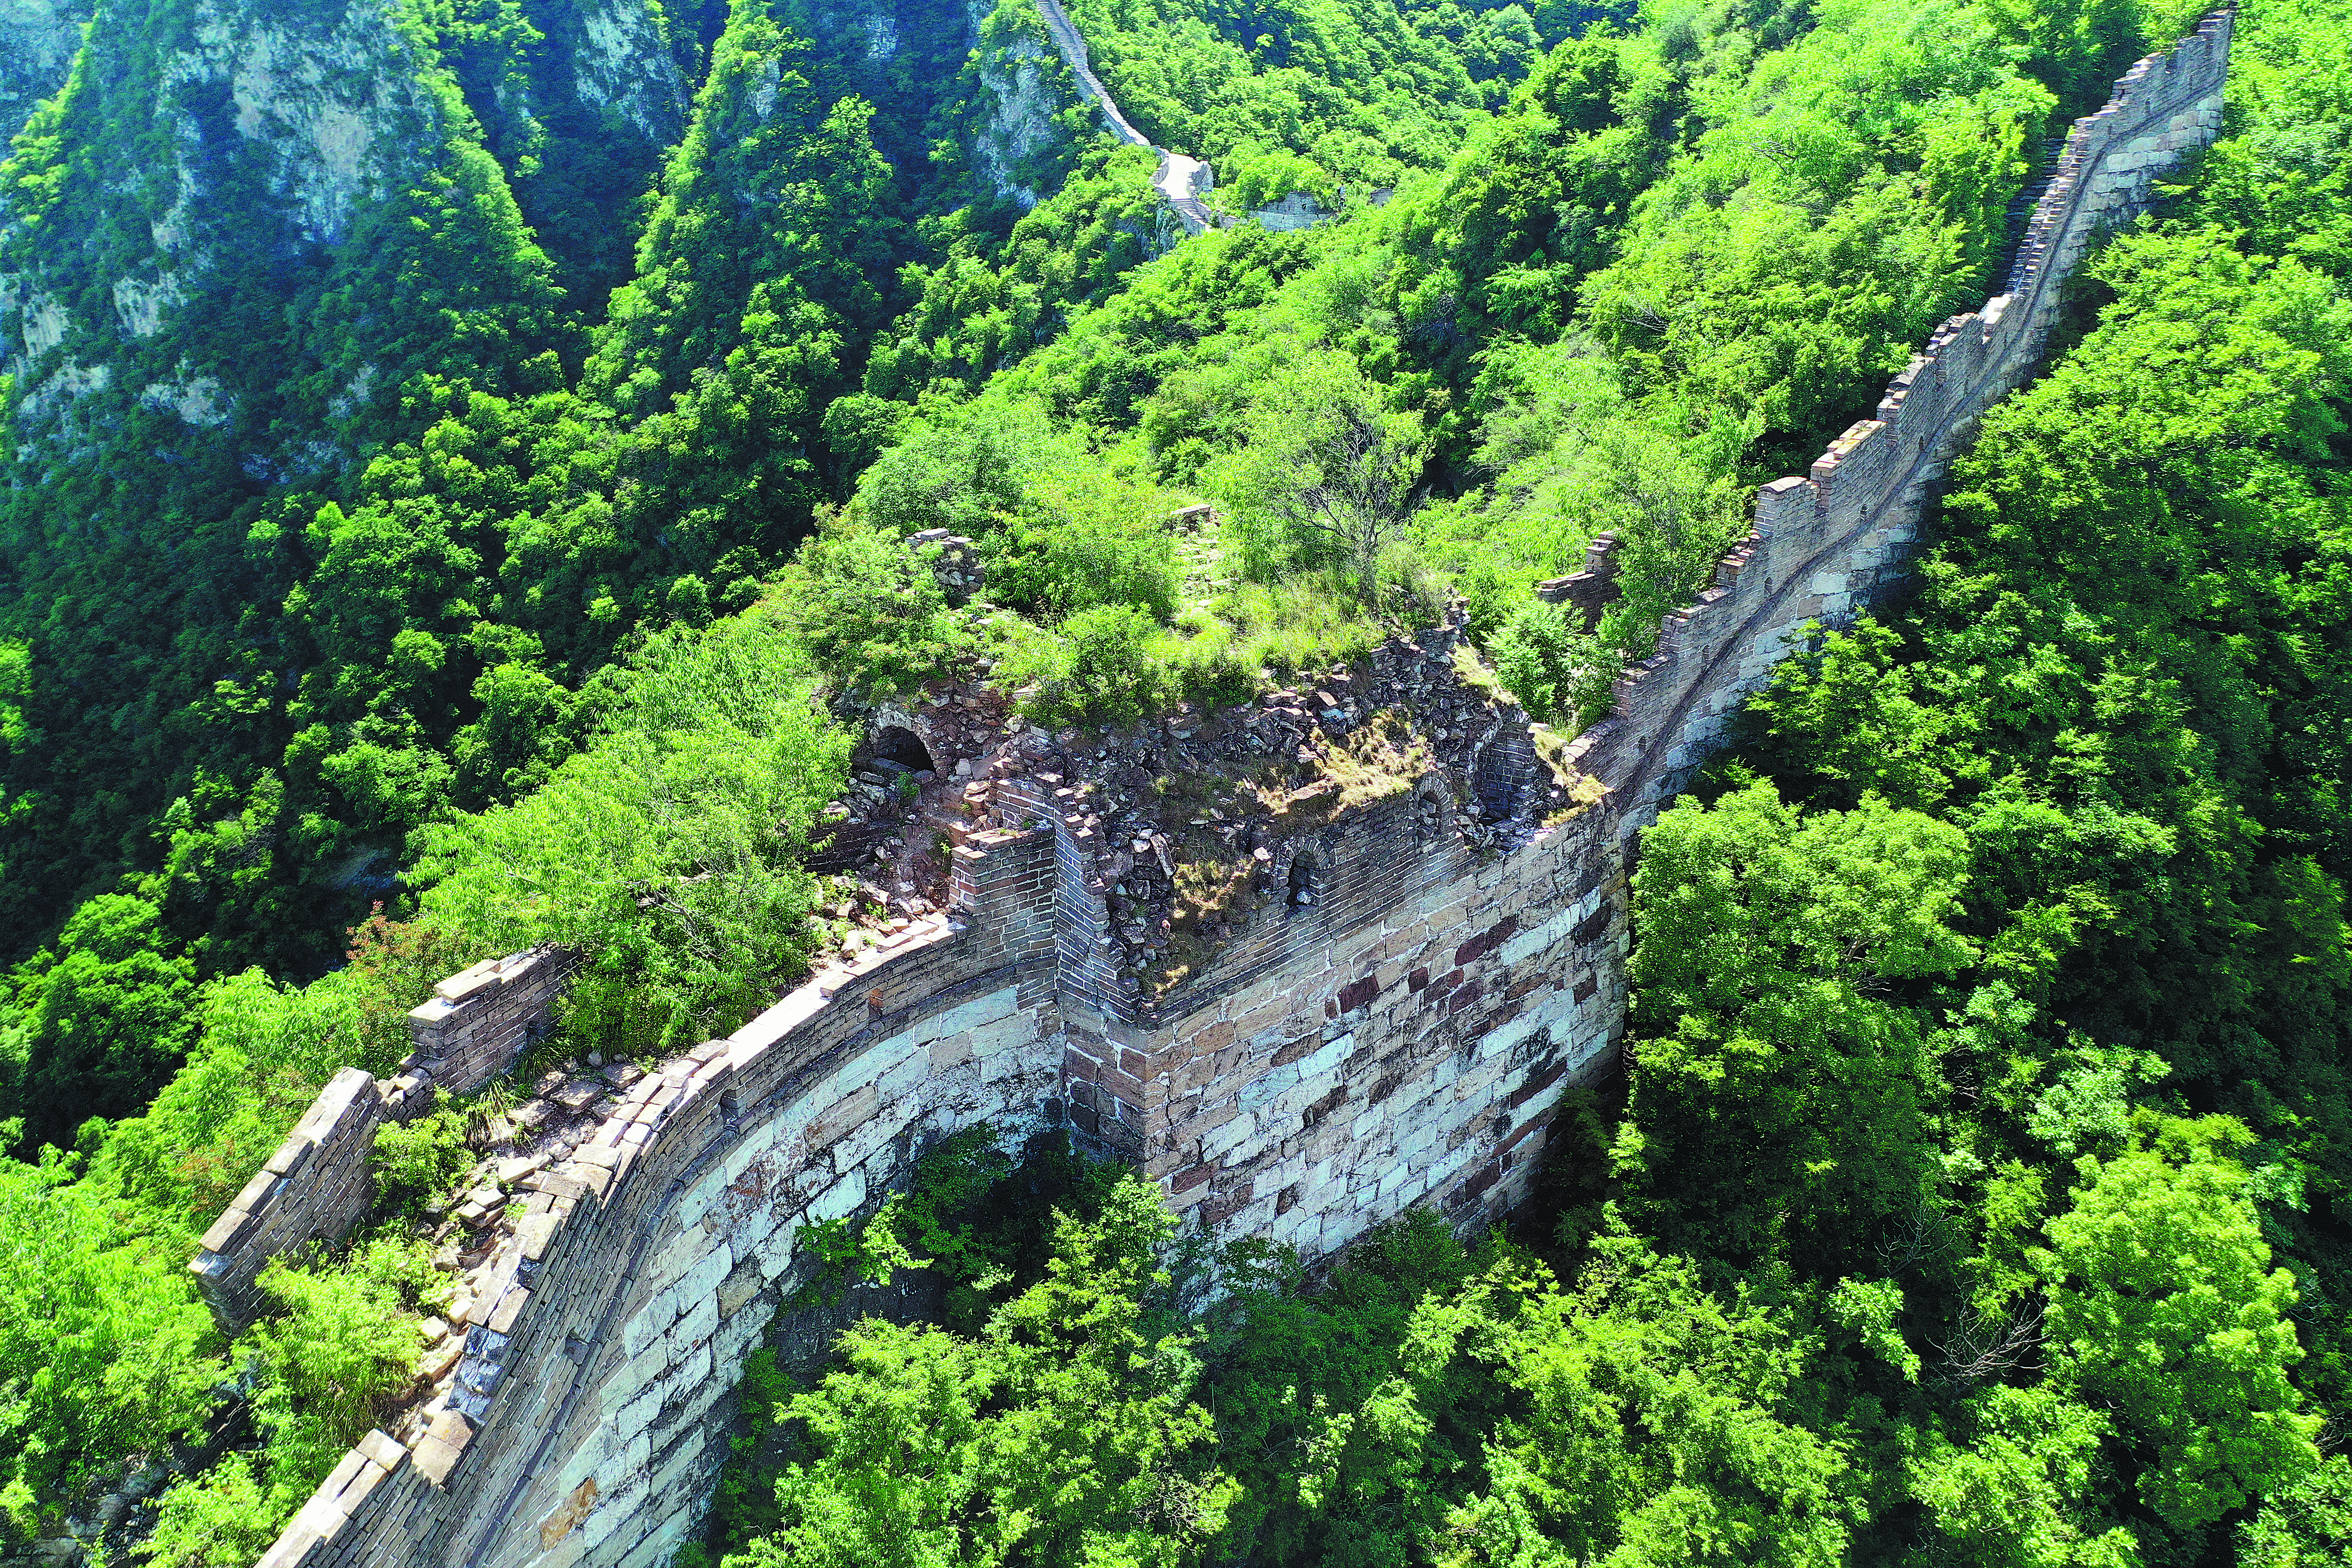 <p>The Jiankou section of the Great Wall ribbons over the top of jagged green mountains in Huairou district, northern Beijing</p>